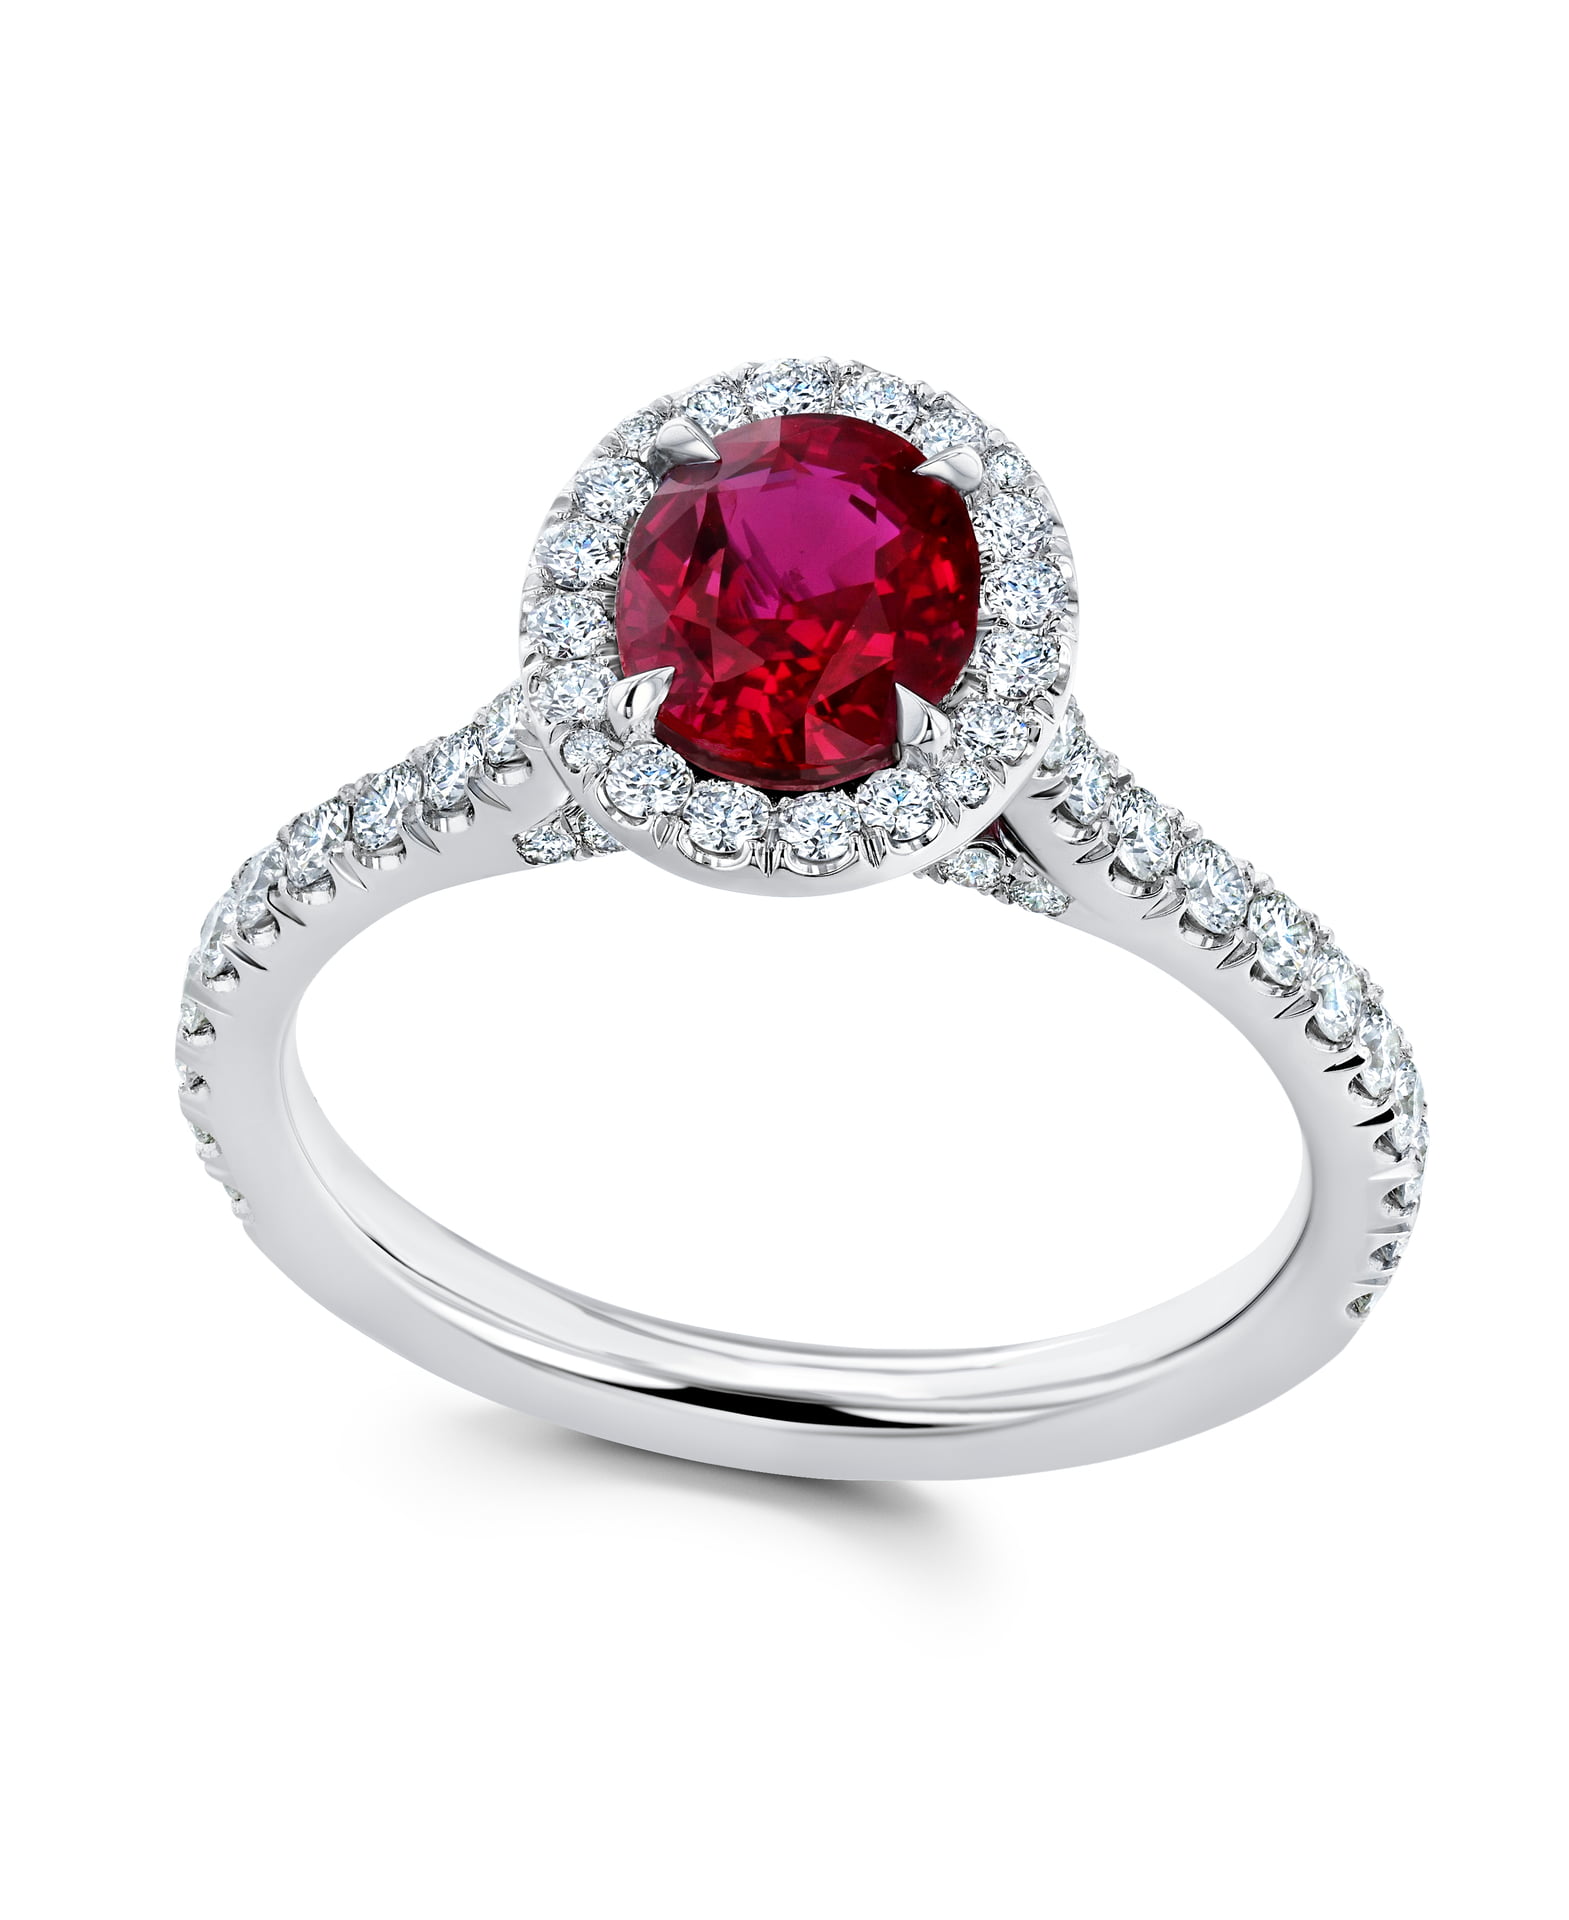 Ruby Engagement Rings Orange County - Nathan Alan Jewelers